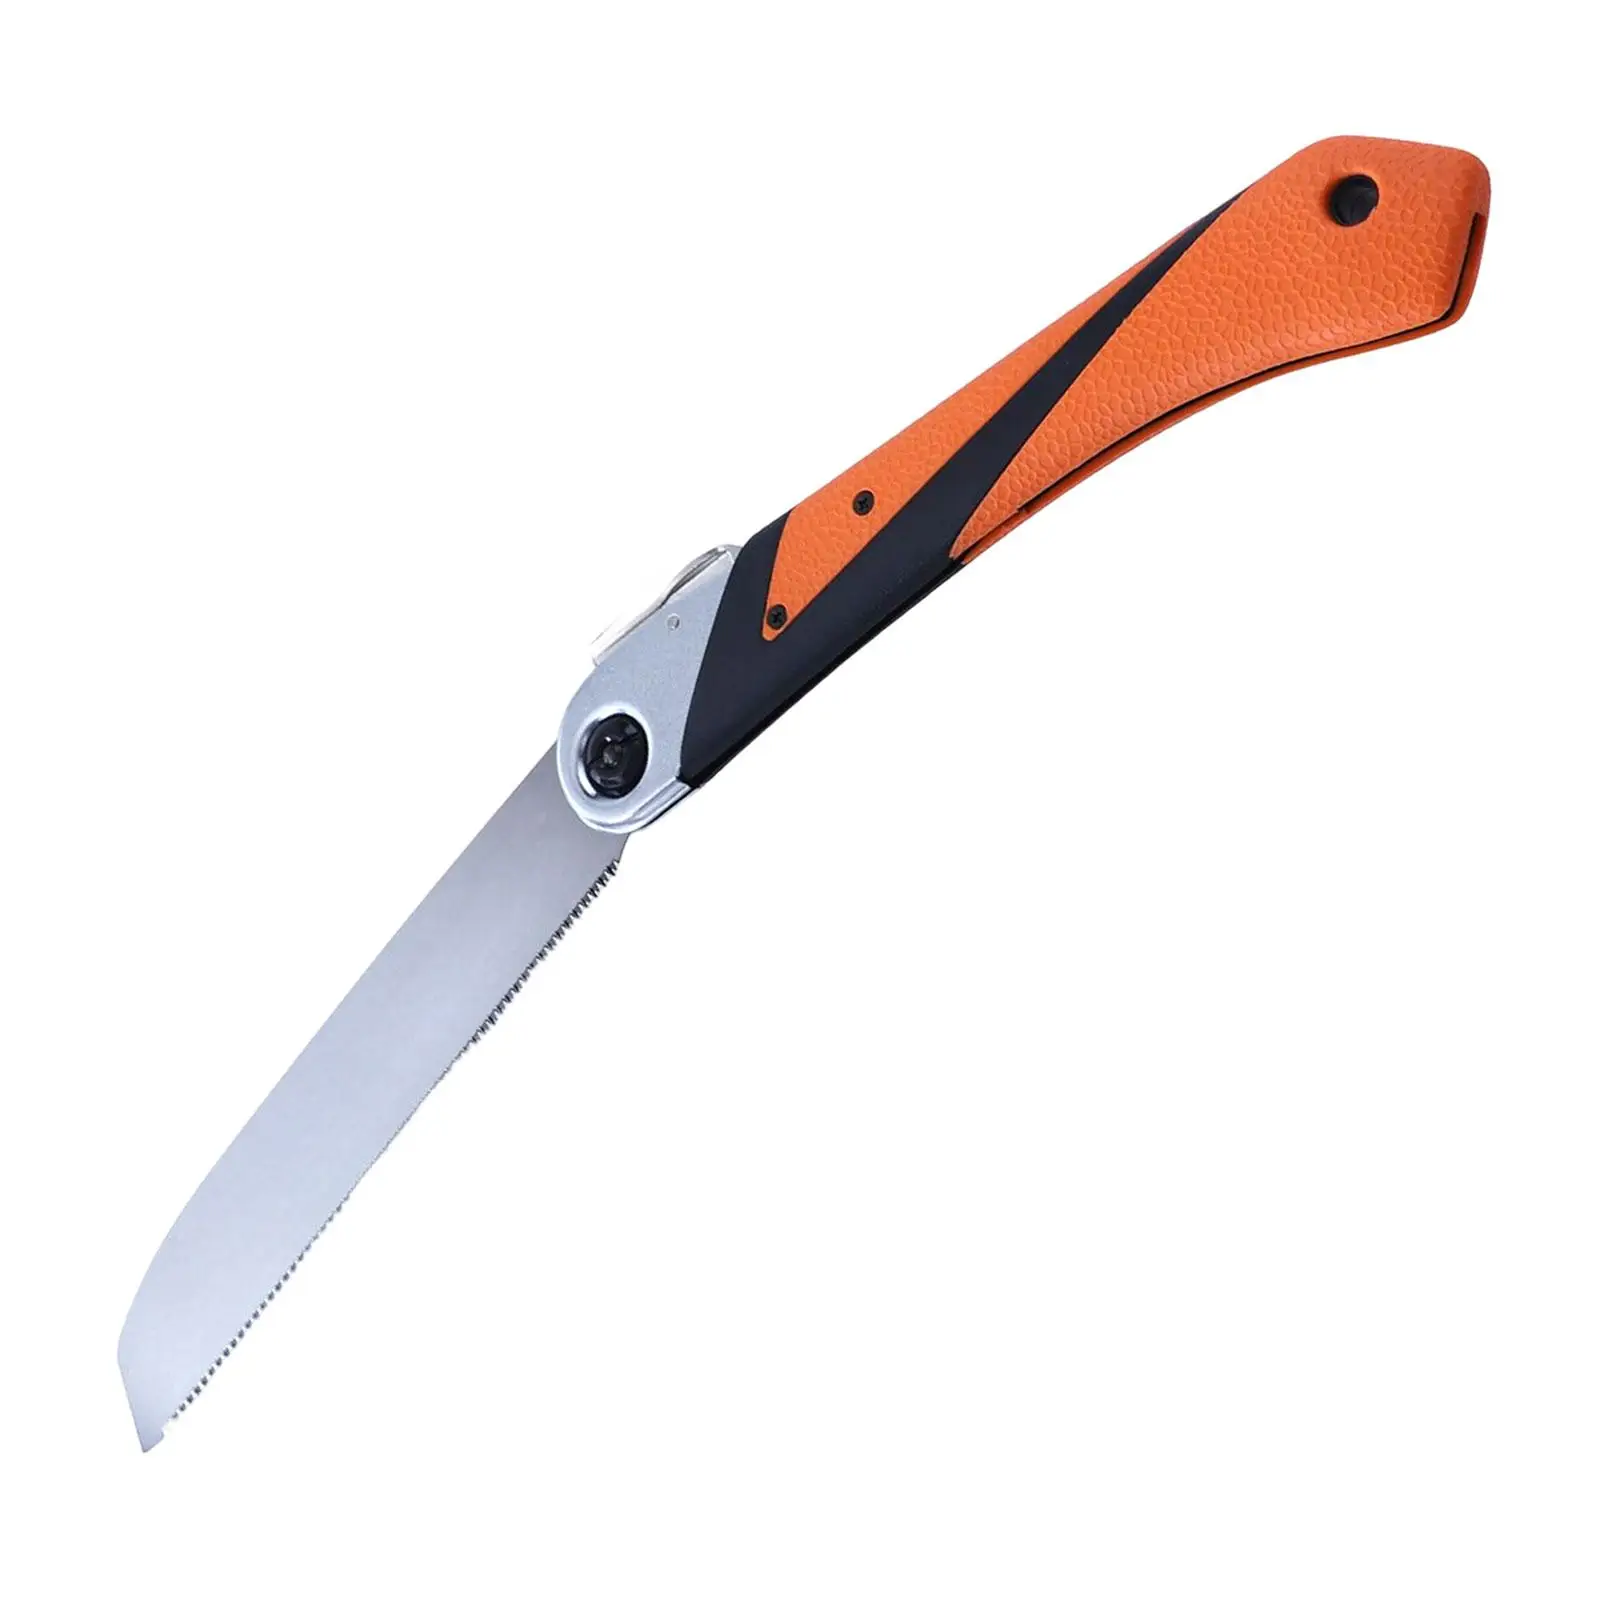 Portable Folding Saw Efficient Sawing Three Sided Grinding Saw Pruning Saw for Outdoor Activities Backpacking Garden Hiking